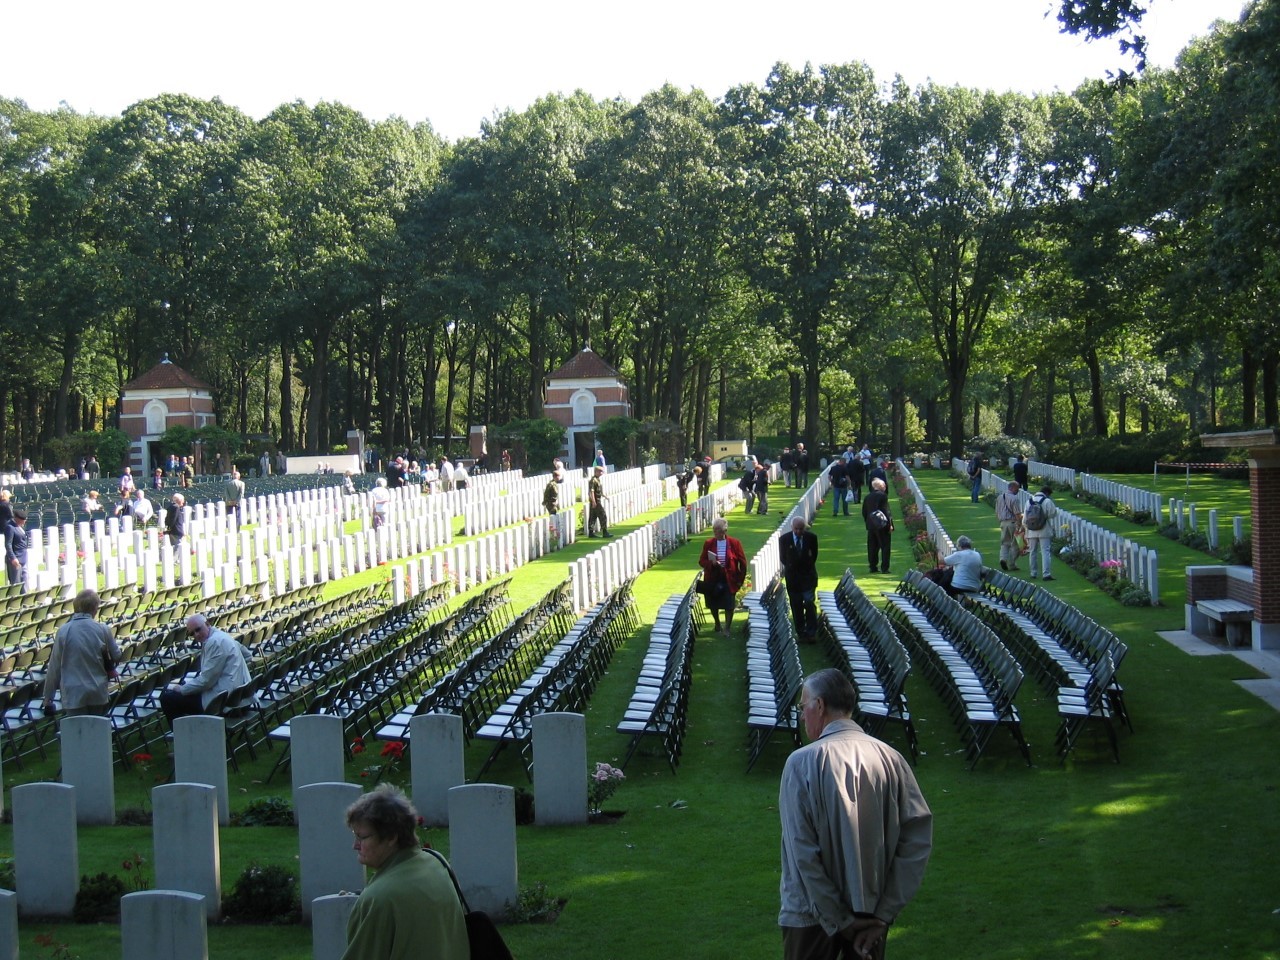 Resting place: The Airborne Cemetery at Oosterbeek near Arnhem 